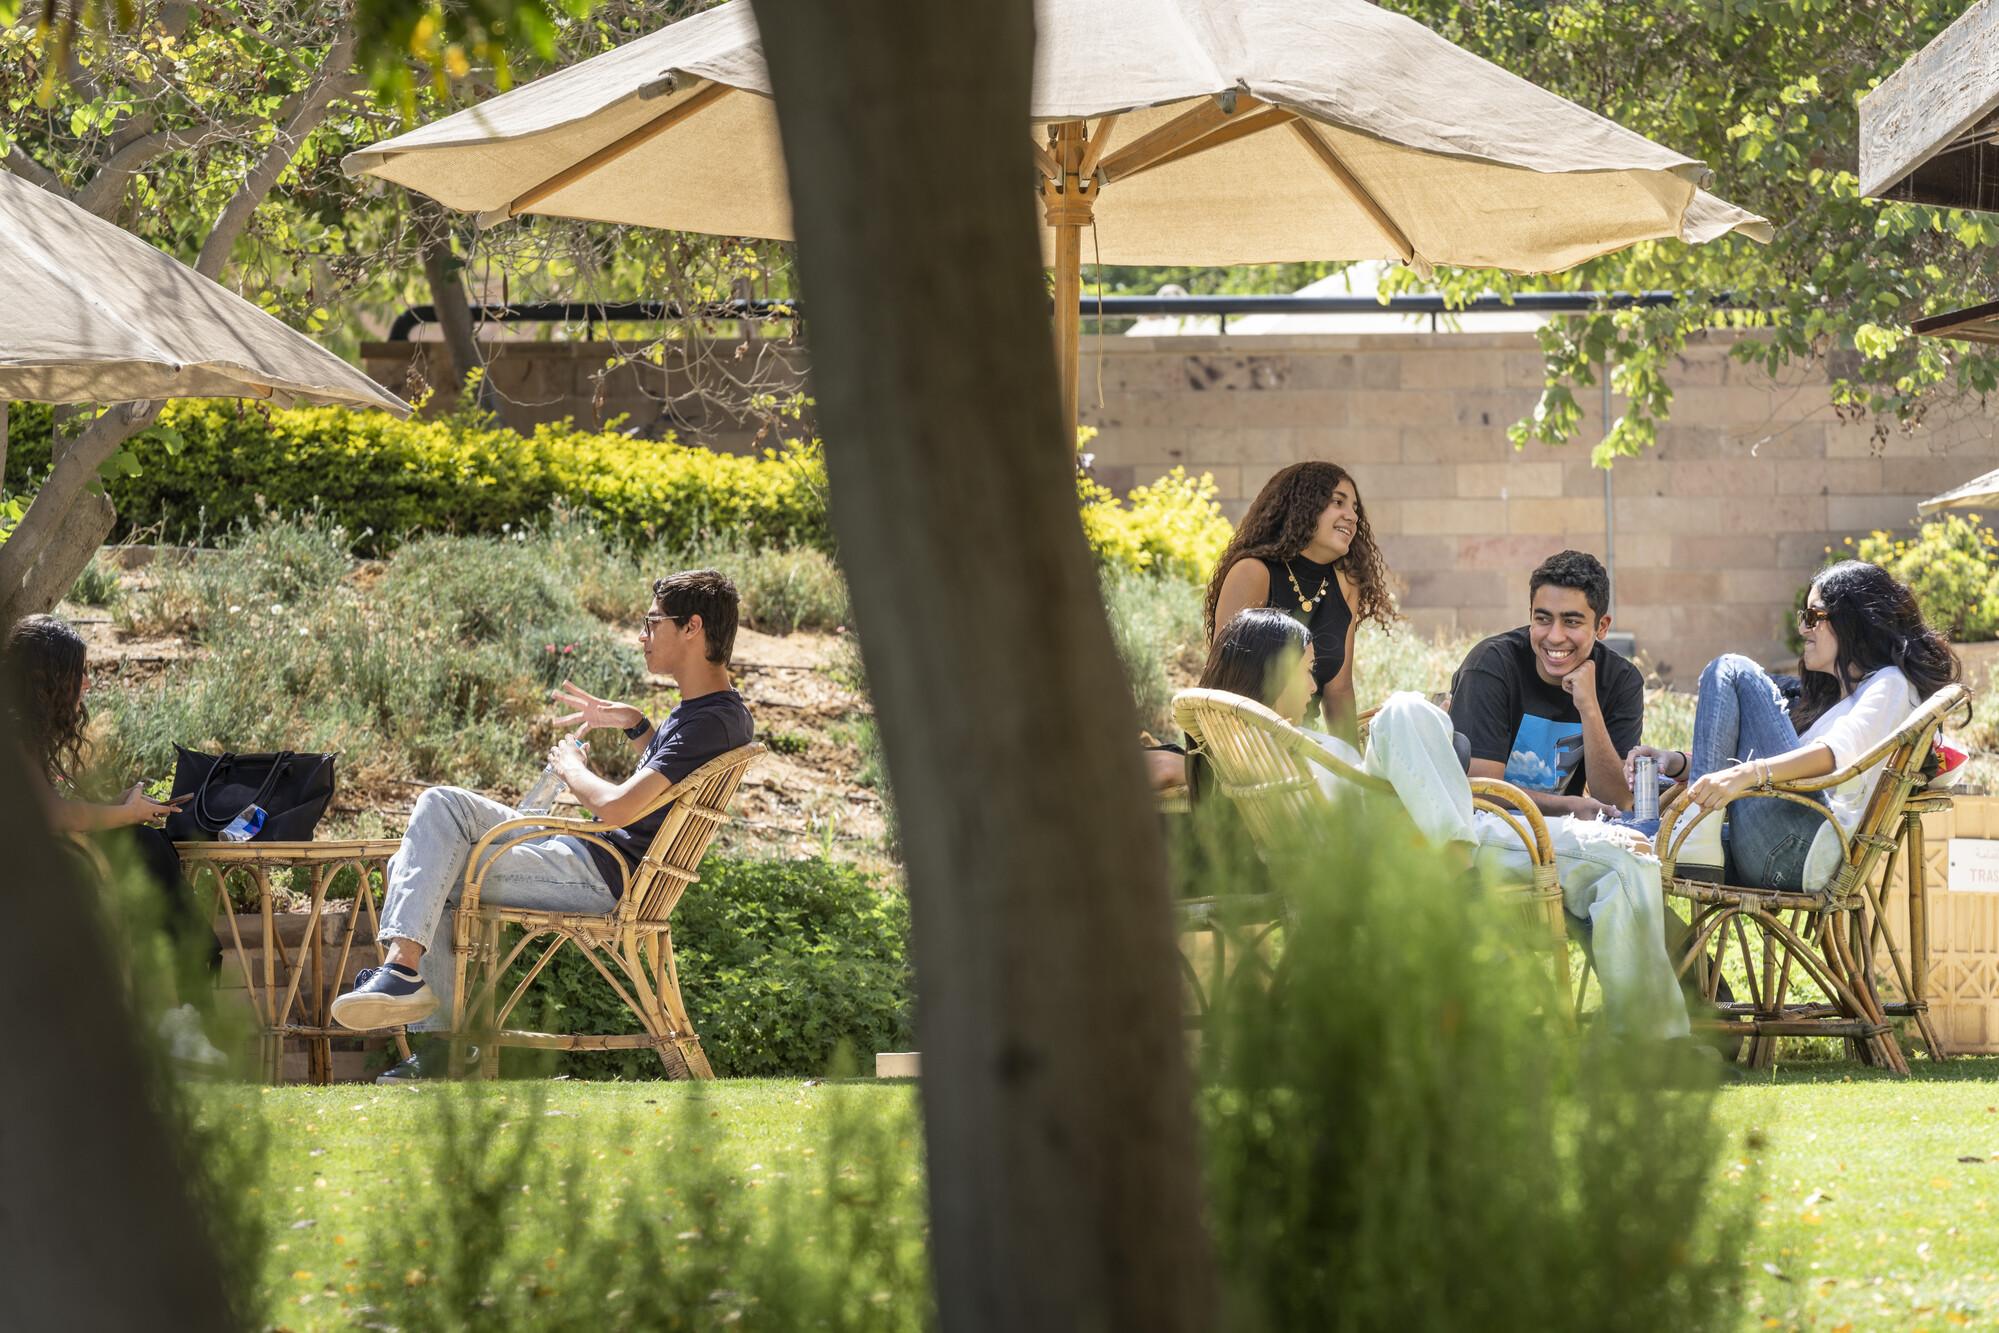 students in AUC gardens talking and socializing